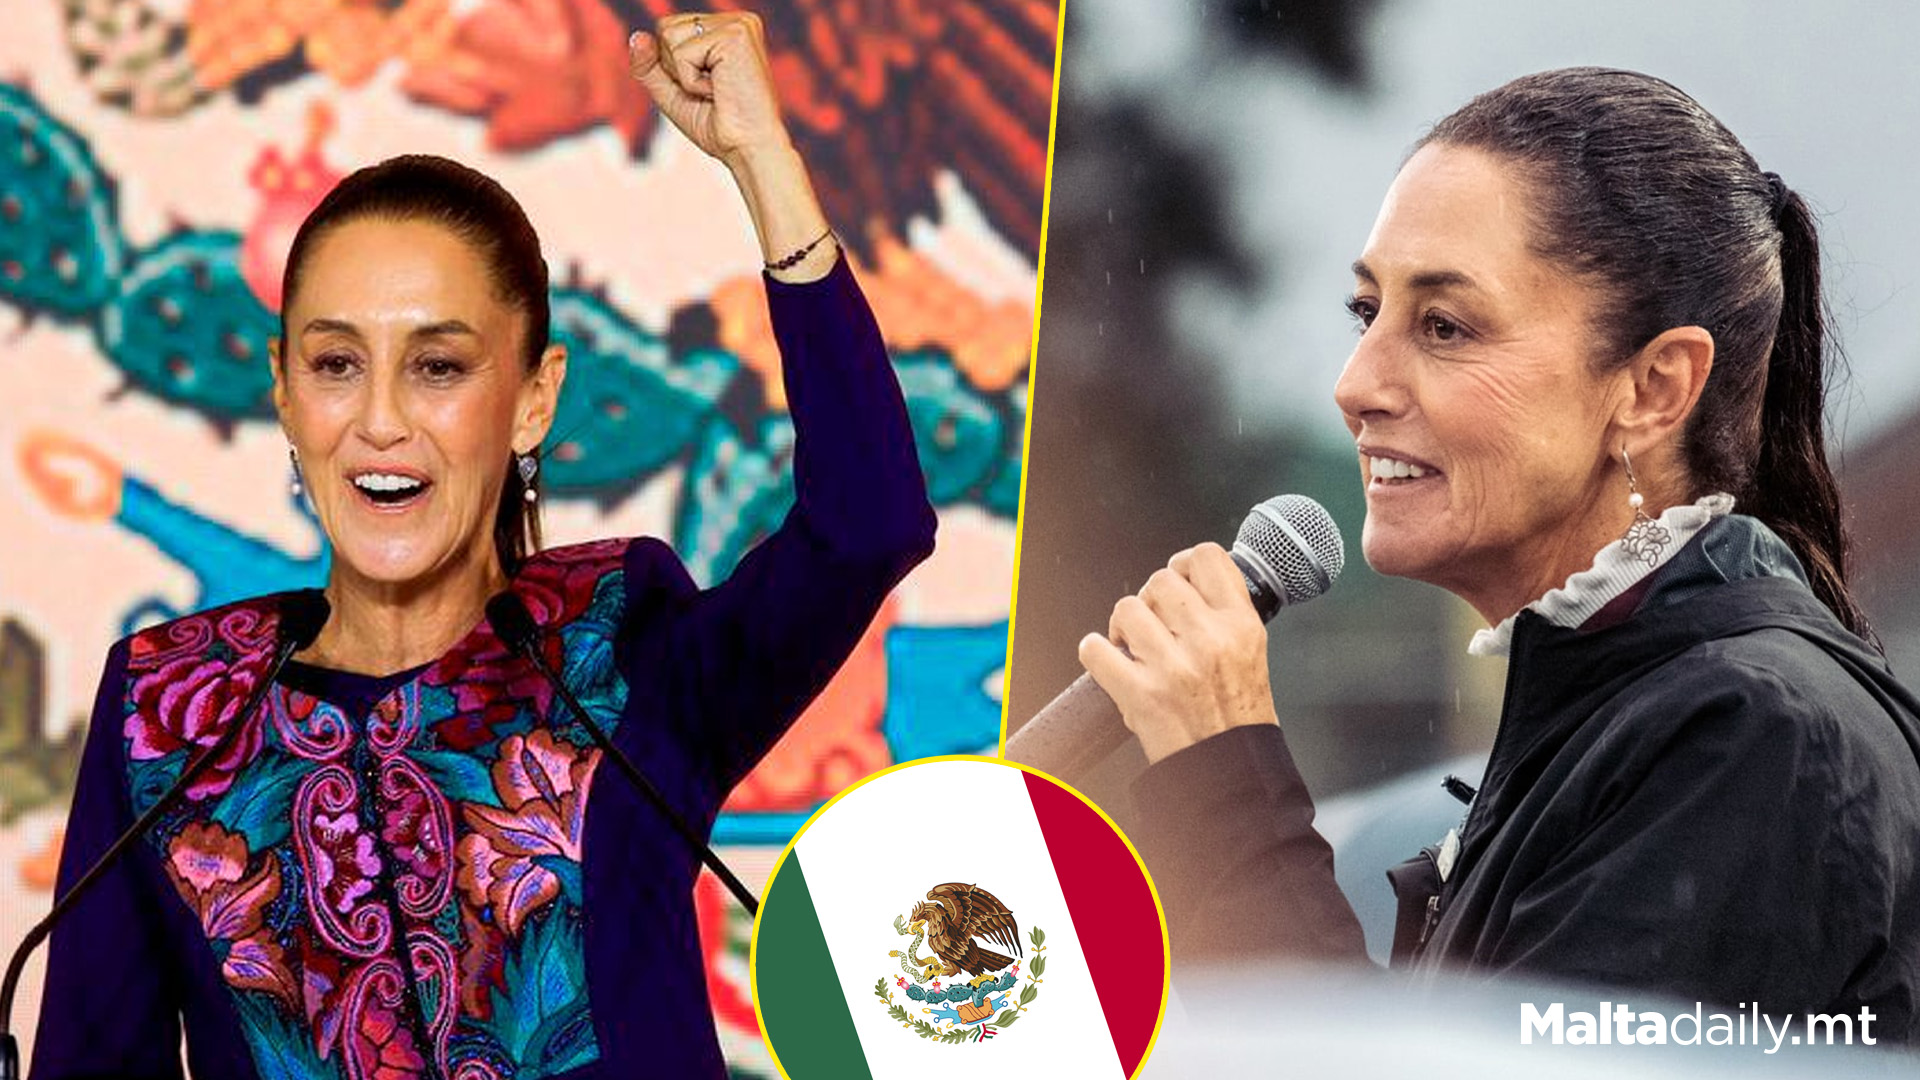 Mexico Elects Its Very First Female President